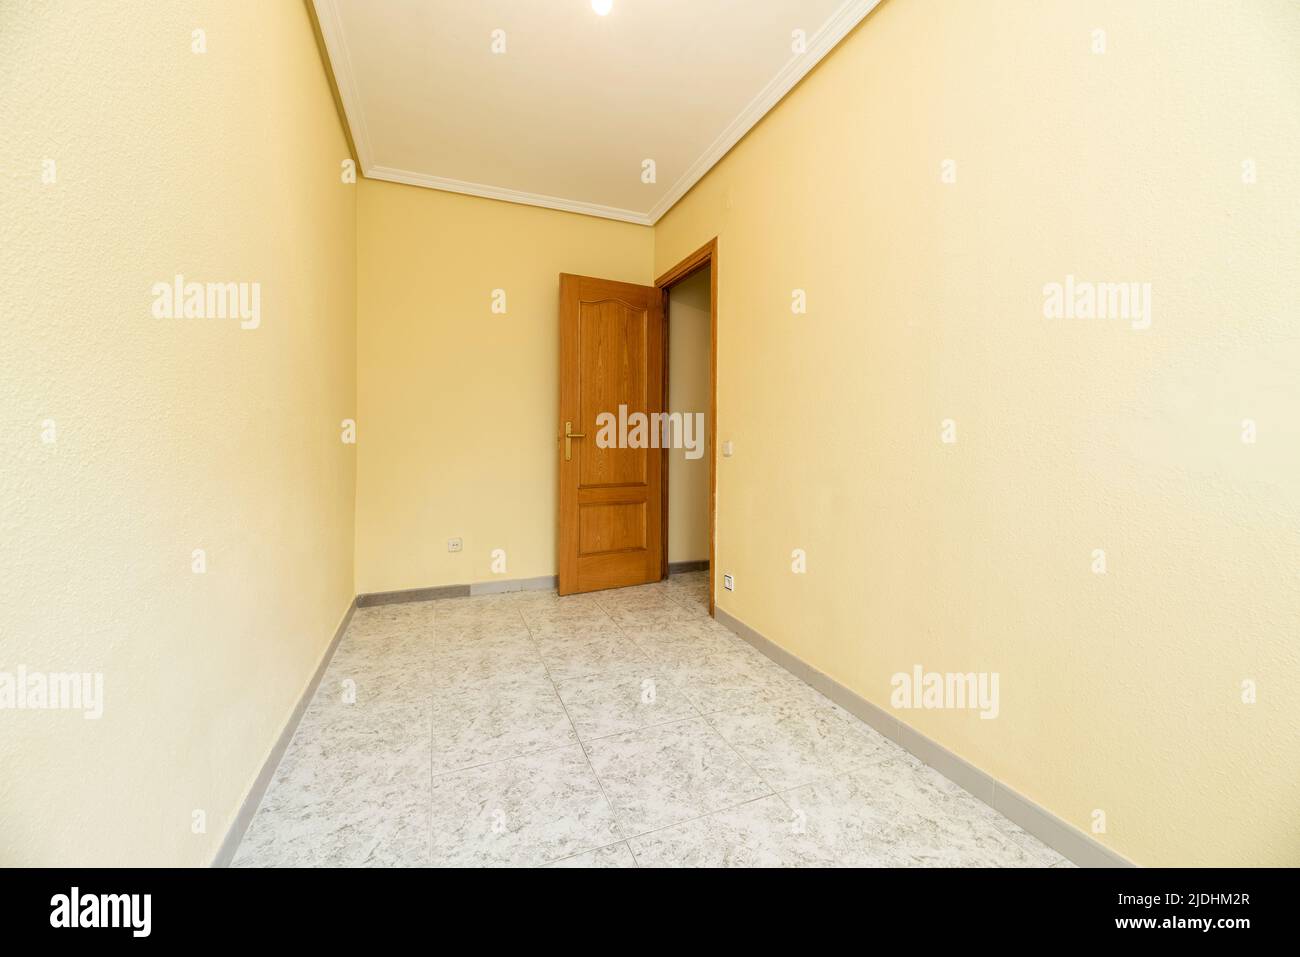 Empty room with stoneware floors, yellow painted walls and pine wood door Stock Photo